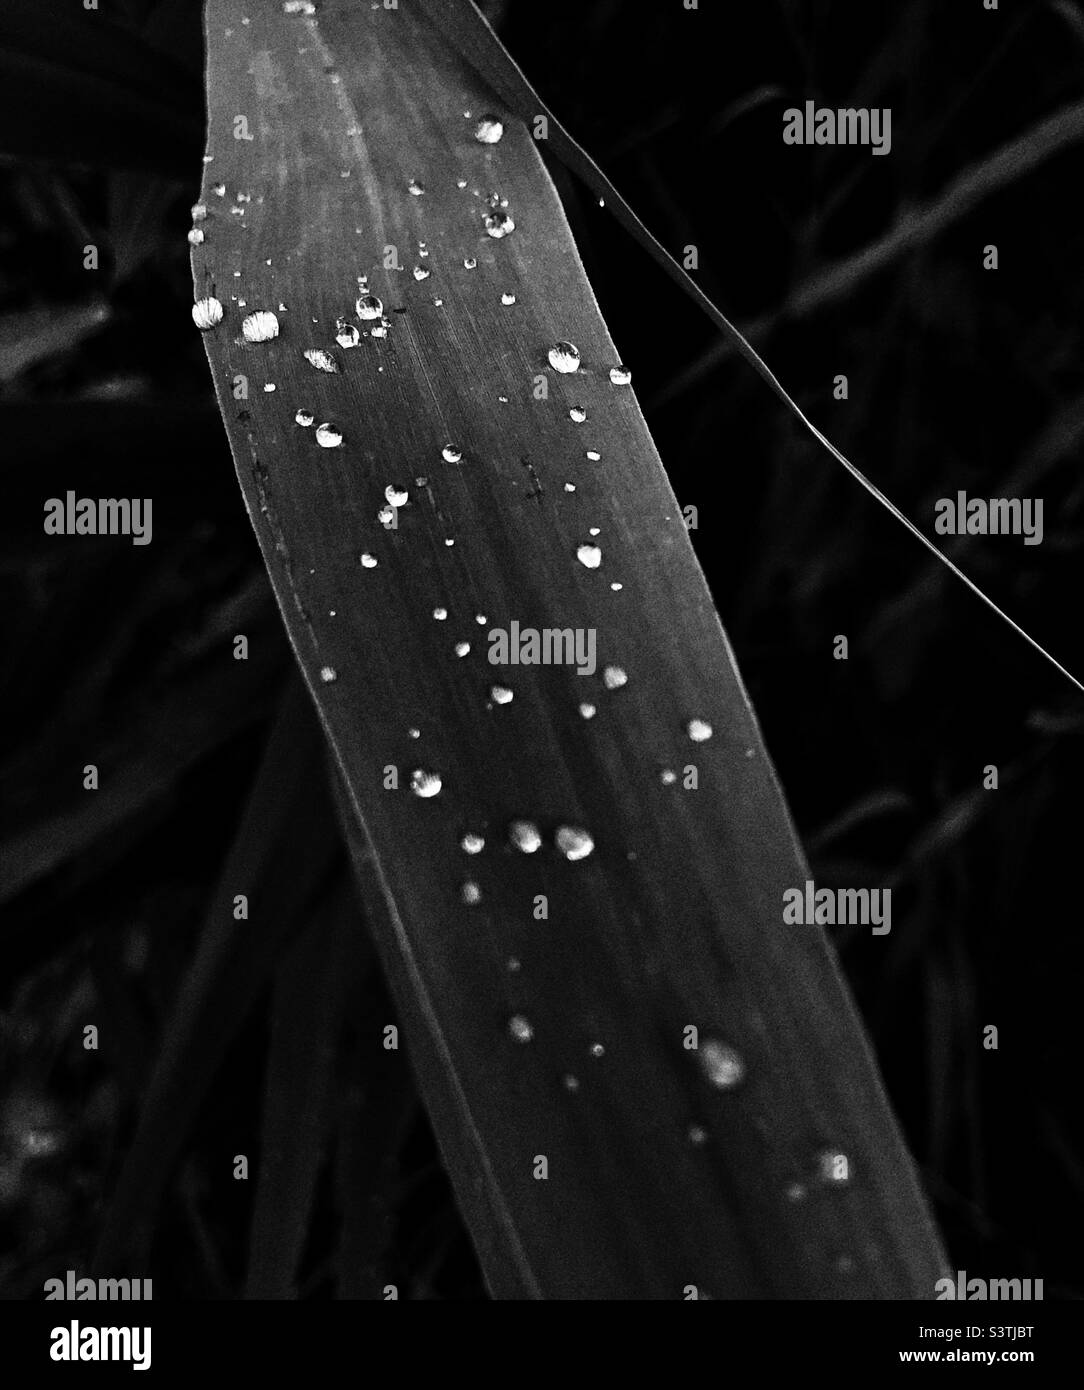 Abstract black and white image of a grass with raindrops on it Stock Photo